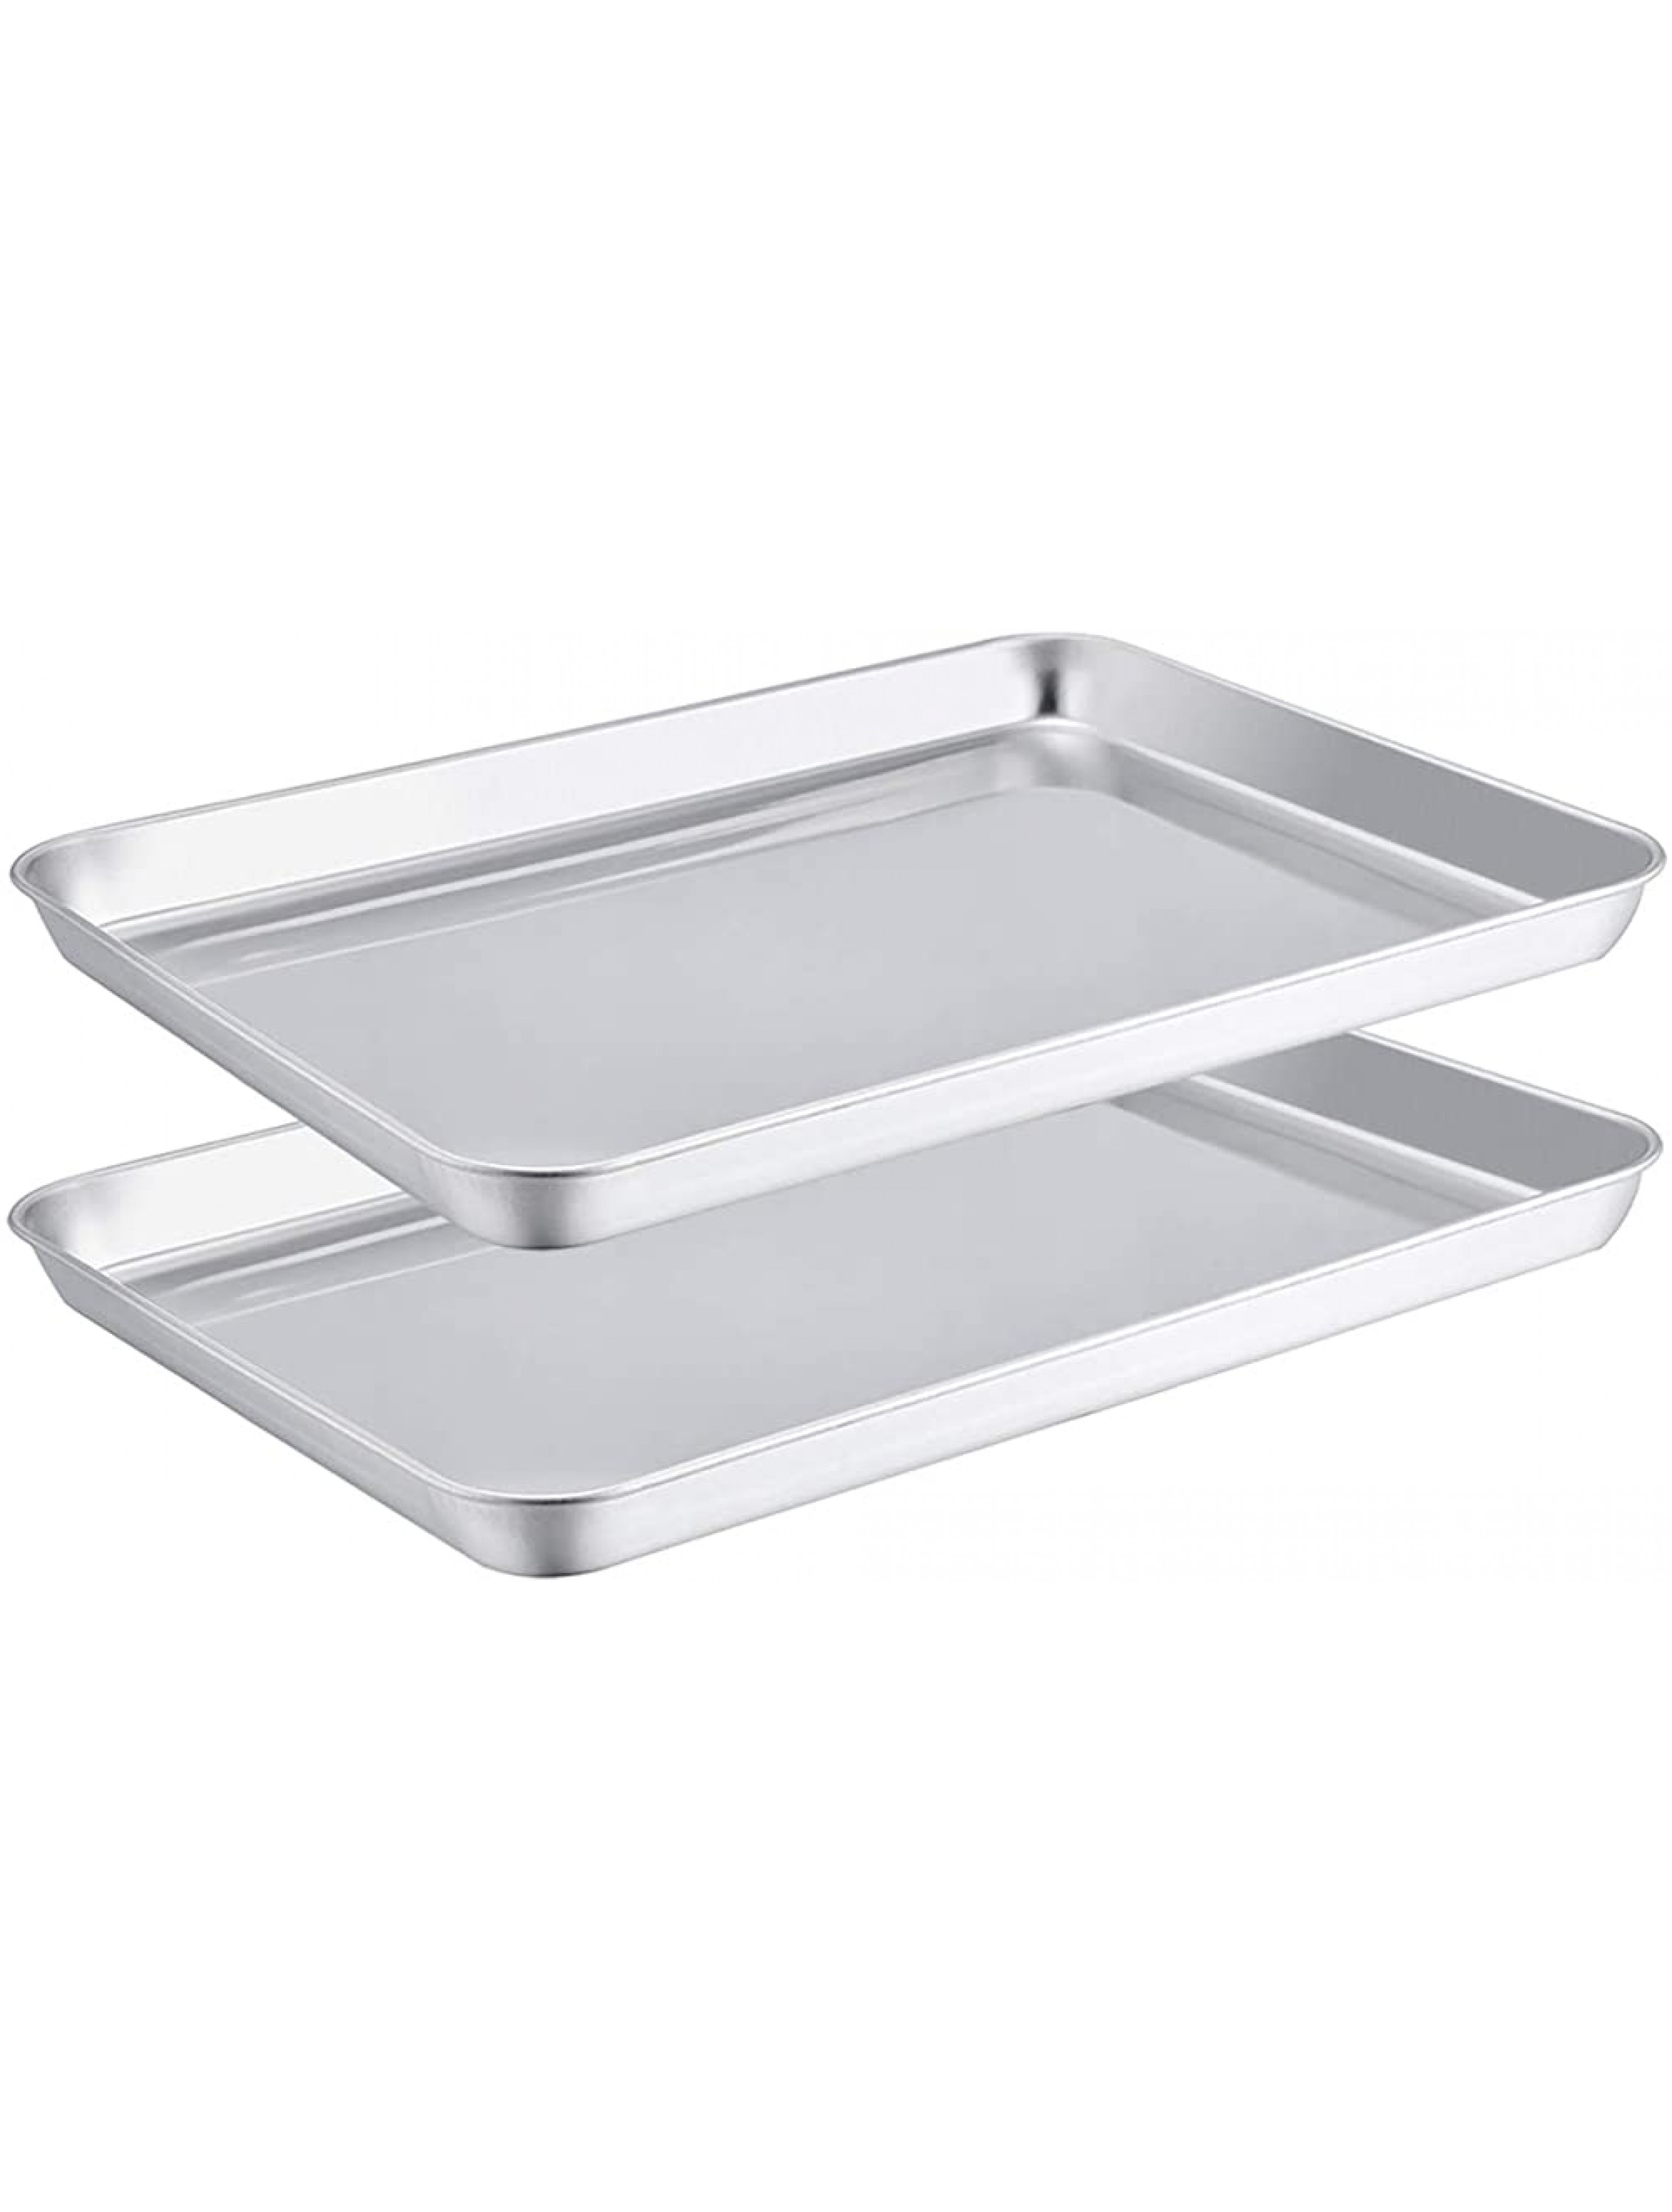 TeamFar Toaster Oven Pans Set of 2 Stainless Steel Compact Toaster Oven Tray Ovenware 8''x10.5''x1'' Non-Toxic & Healthy Easy Clean & Dishwasher Safe Roll Edge & Mirror Finish - BP9F0YUKC